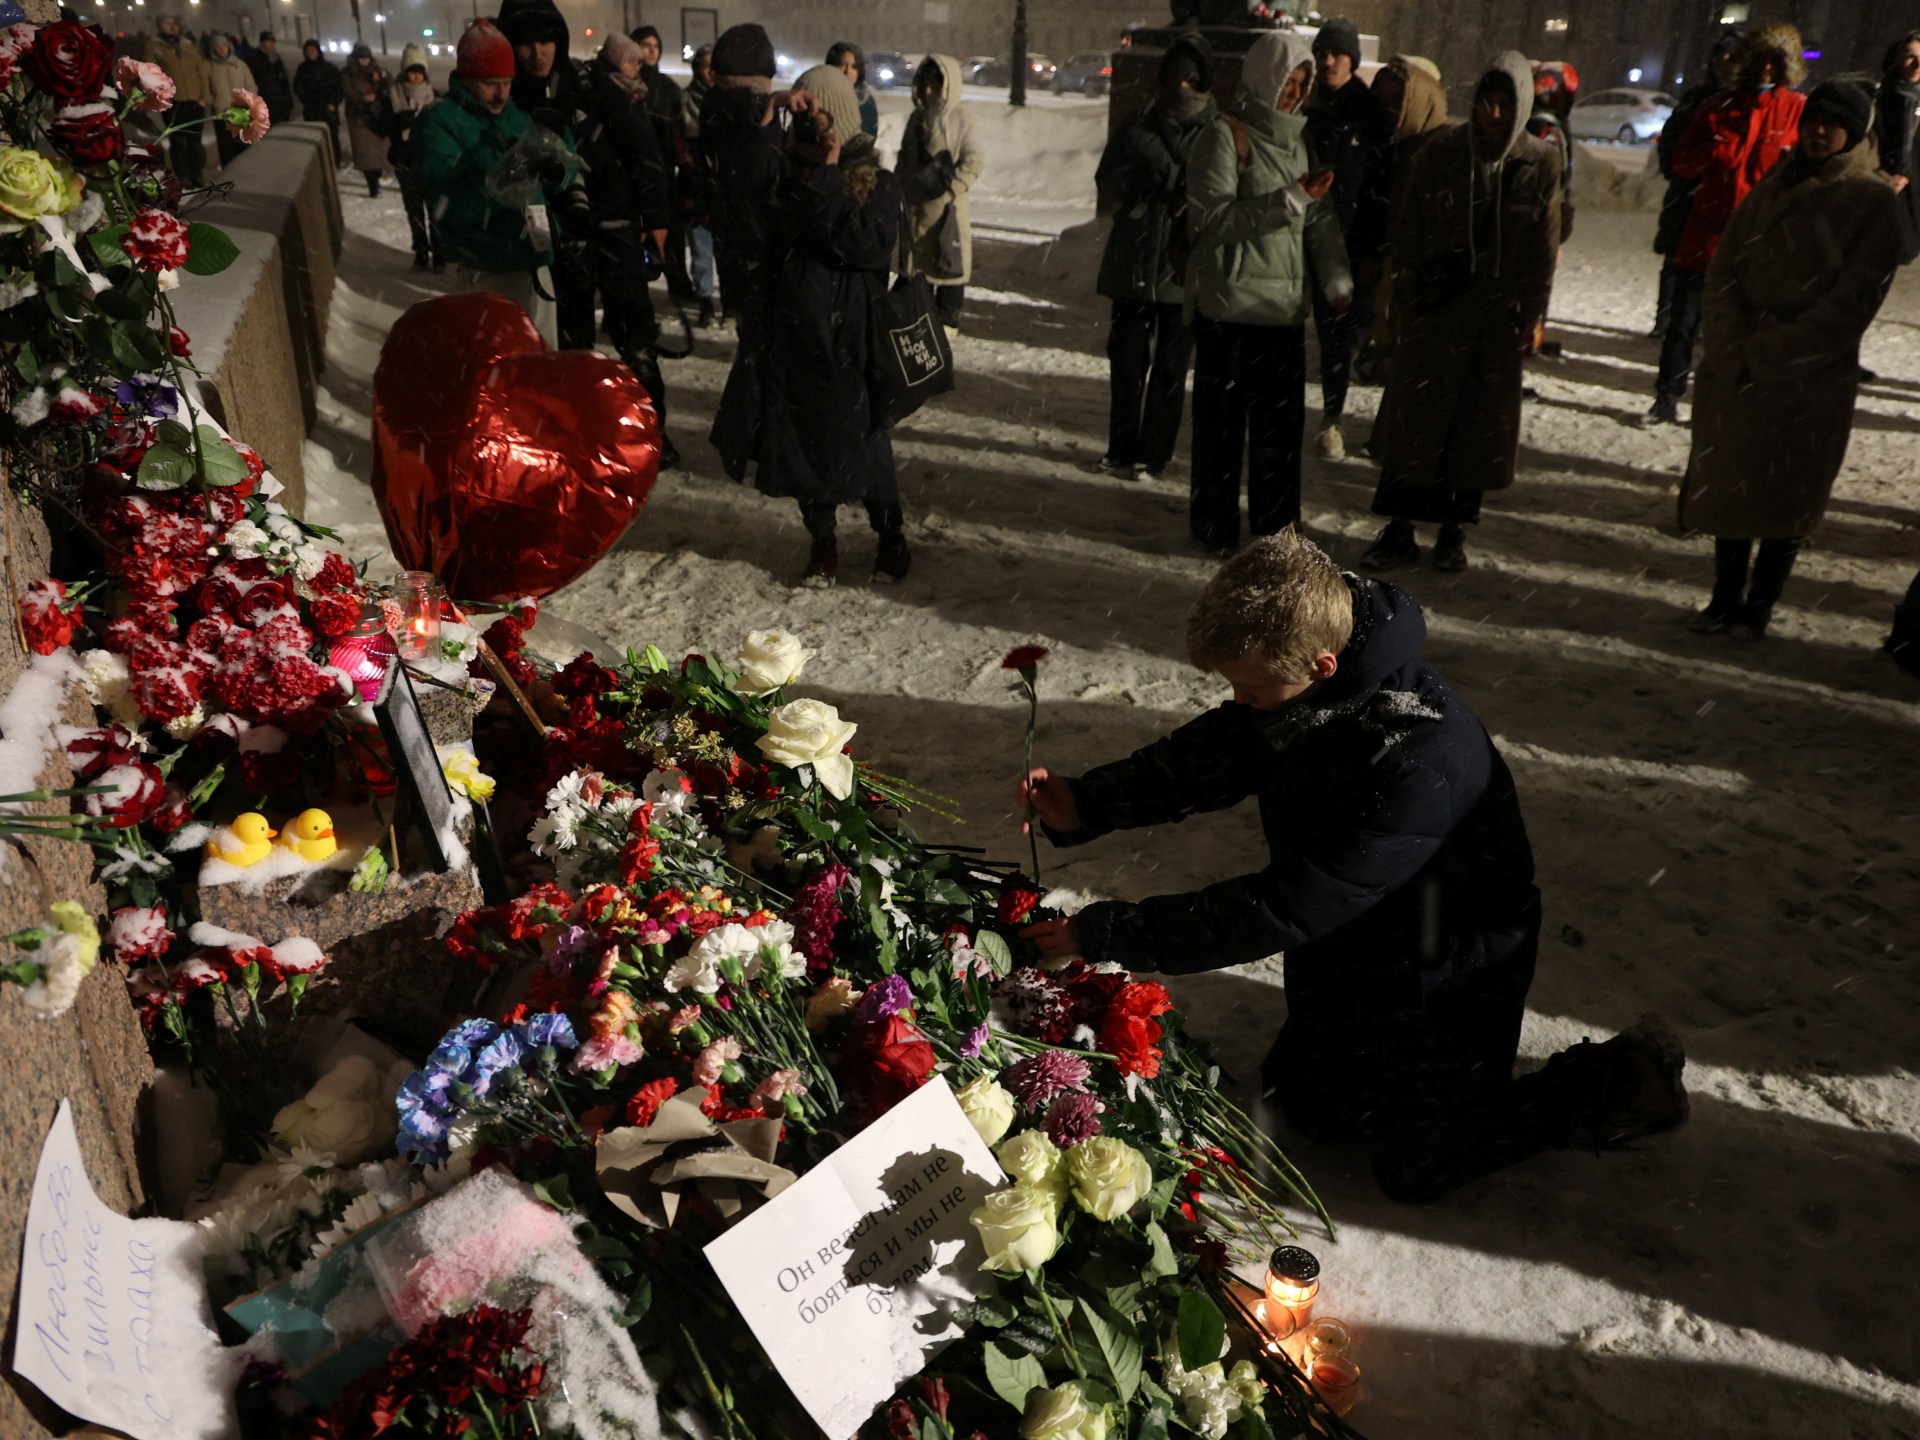 Photos: Honouring Navalny: Supporters gather to mourn, express outrage